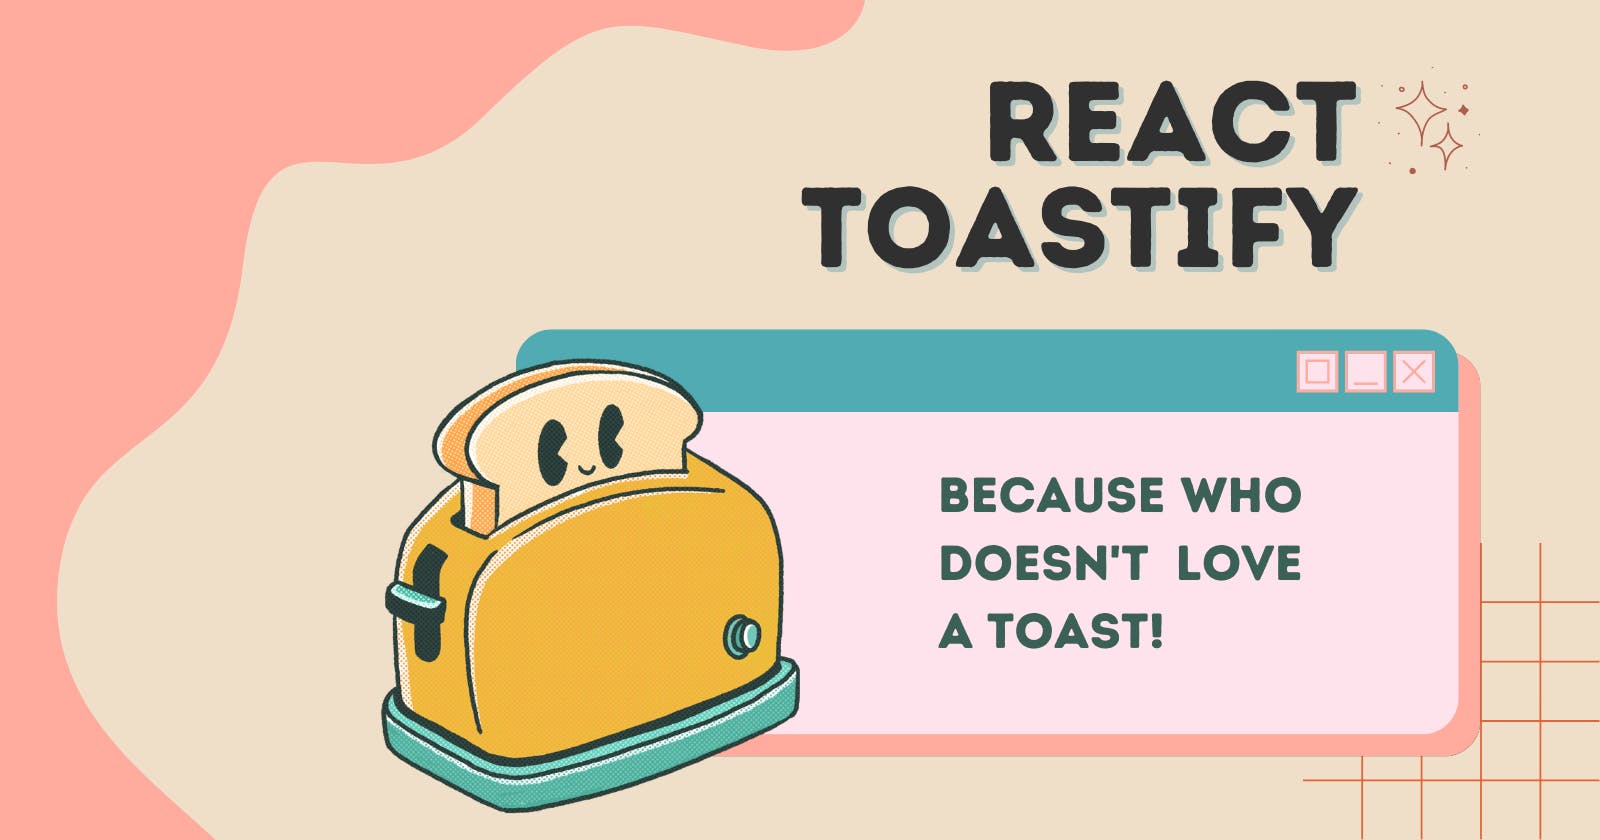 Toast Your React App: A Beginner's Guide to React Toastify Notifications